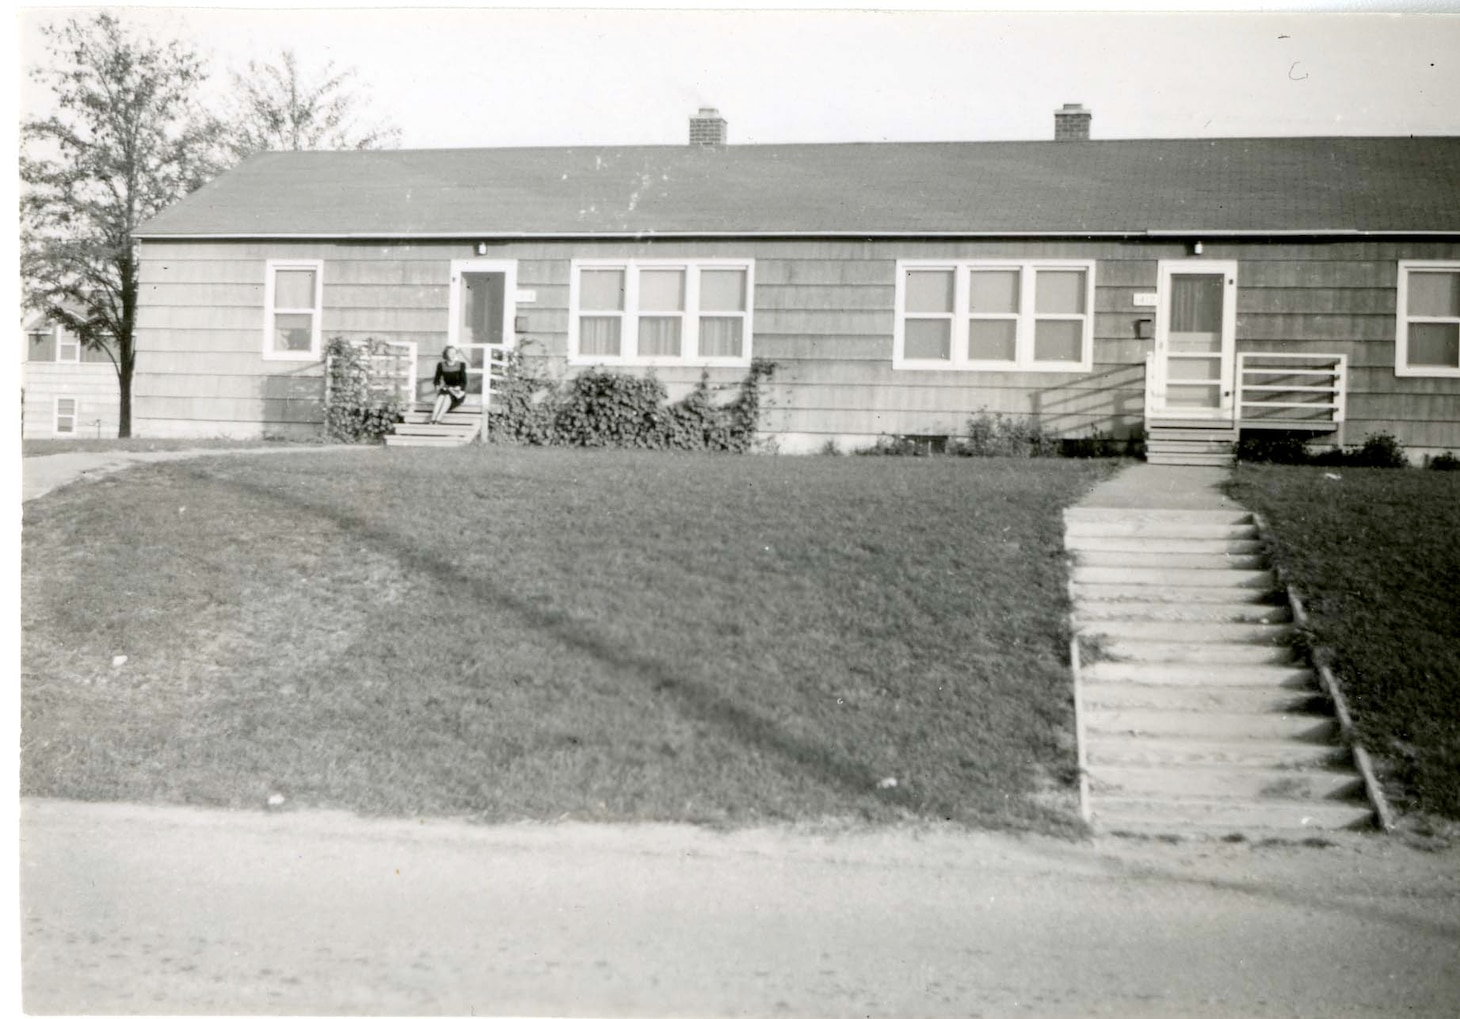 Type “B” two-family prefabricated duplex, from architect Gustav Albin Pehrson, ca. autumn 1944. Image courtesy Hanford History Project, accessed May 3, 2023, http://www.hanfordhistory.com/items/show/922.